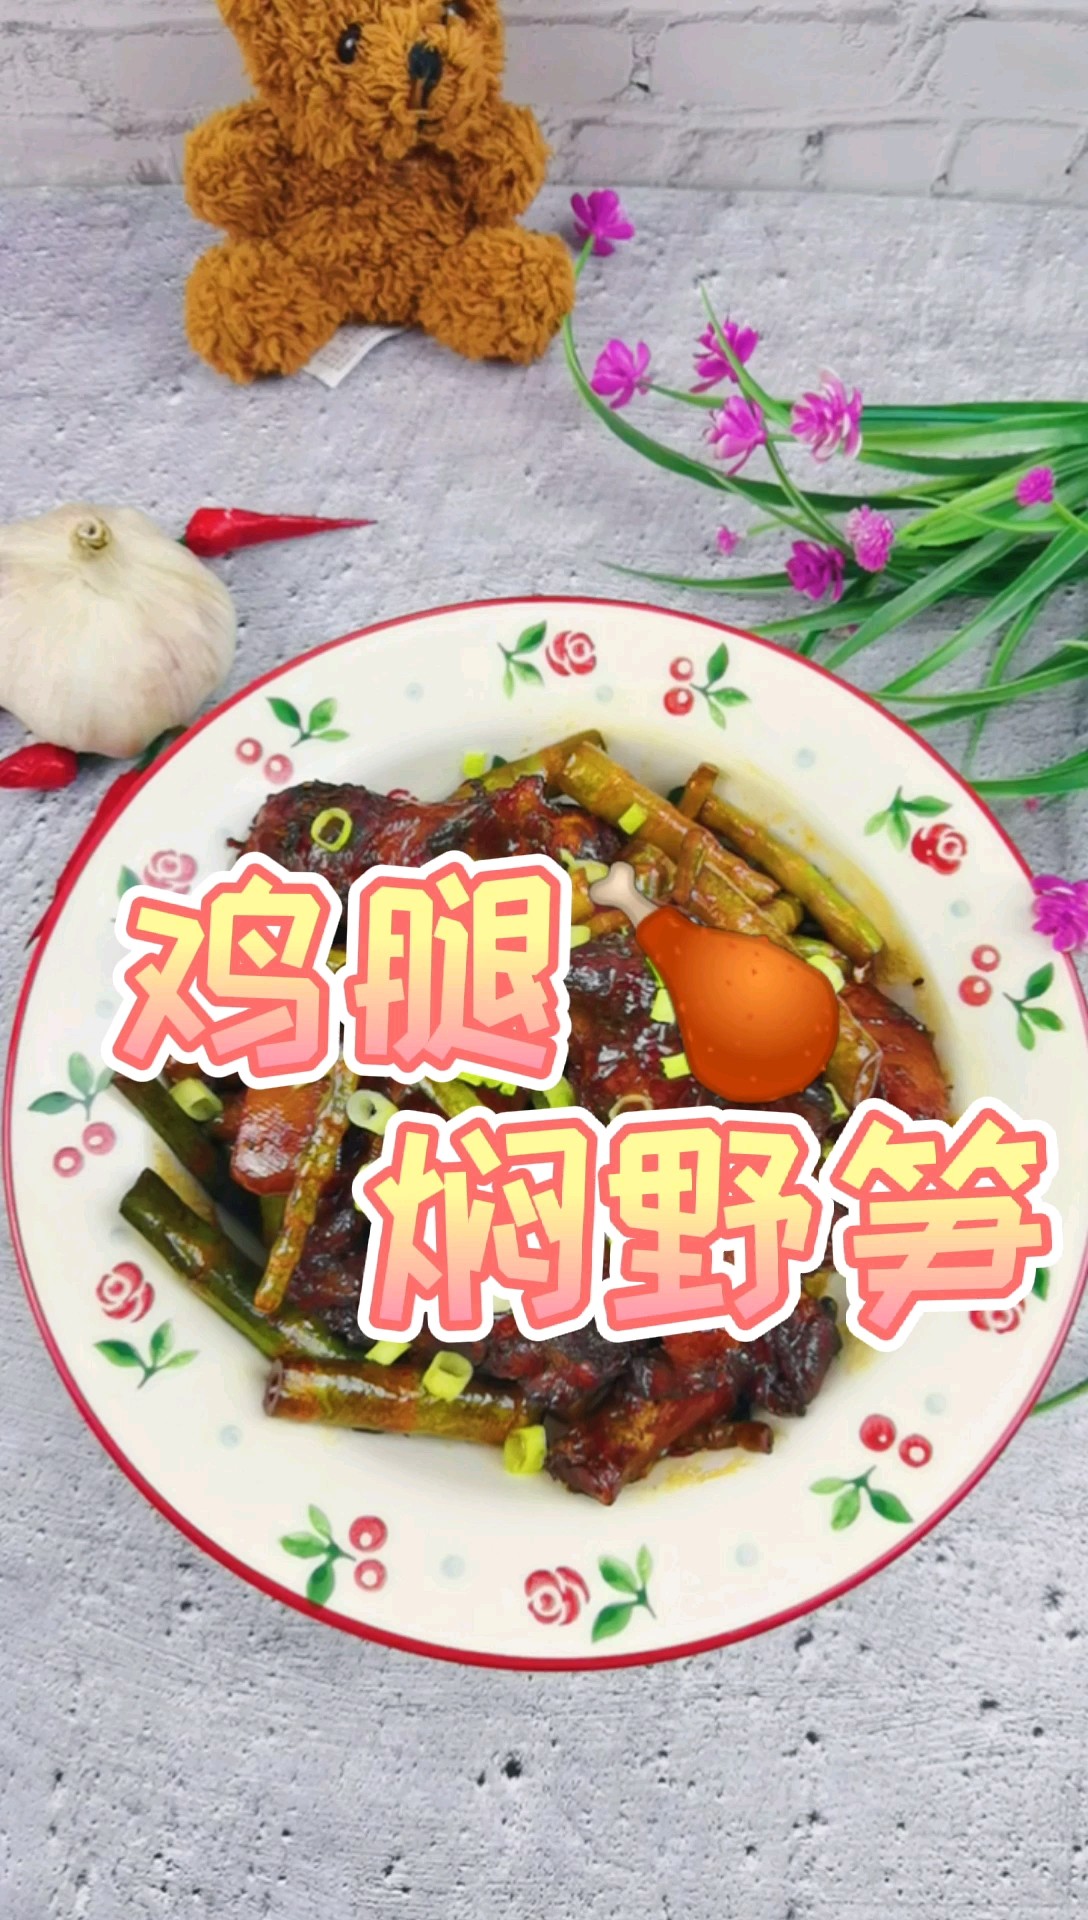 The Fancy Way of Chicken Drumstick-chicken Drumstick Braised Wild Bamboo Shoots, Rich Side Dishes, recipe